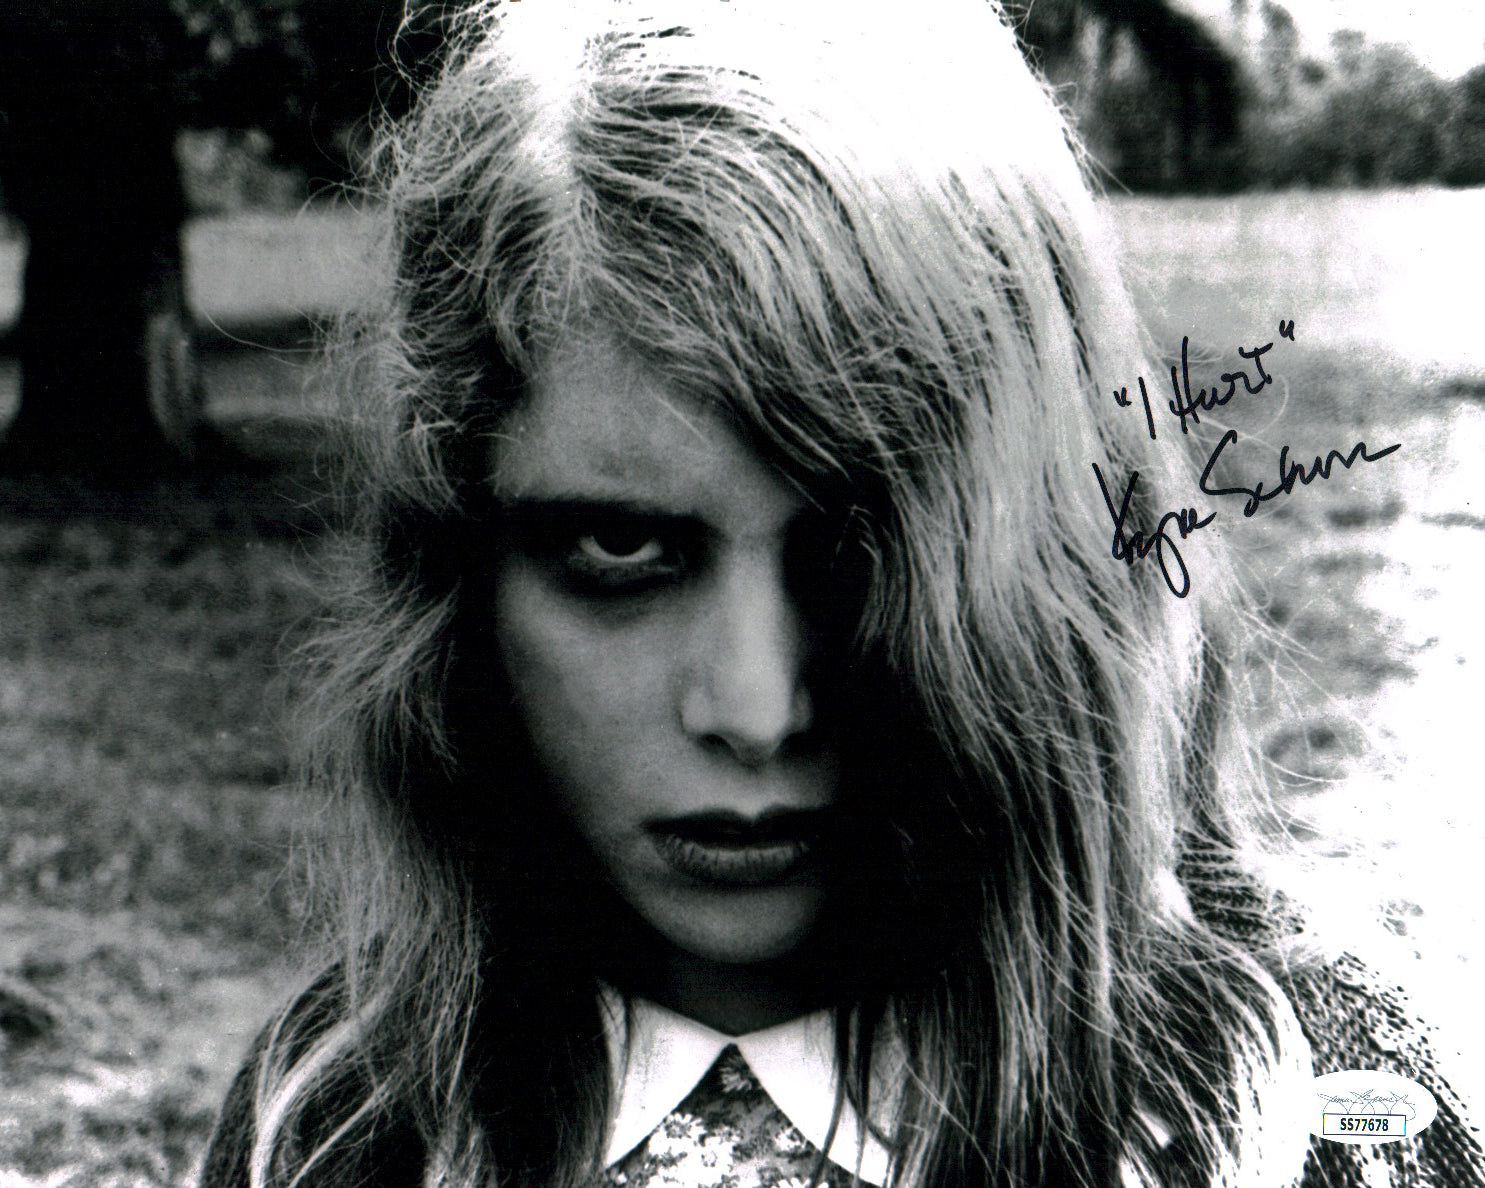 Kyra Schon Night of the Living Dead 8x10 Signed Photo JSA Certified Autograph